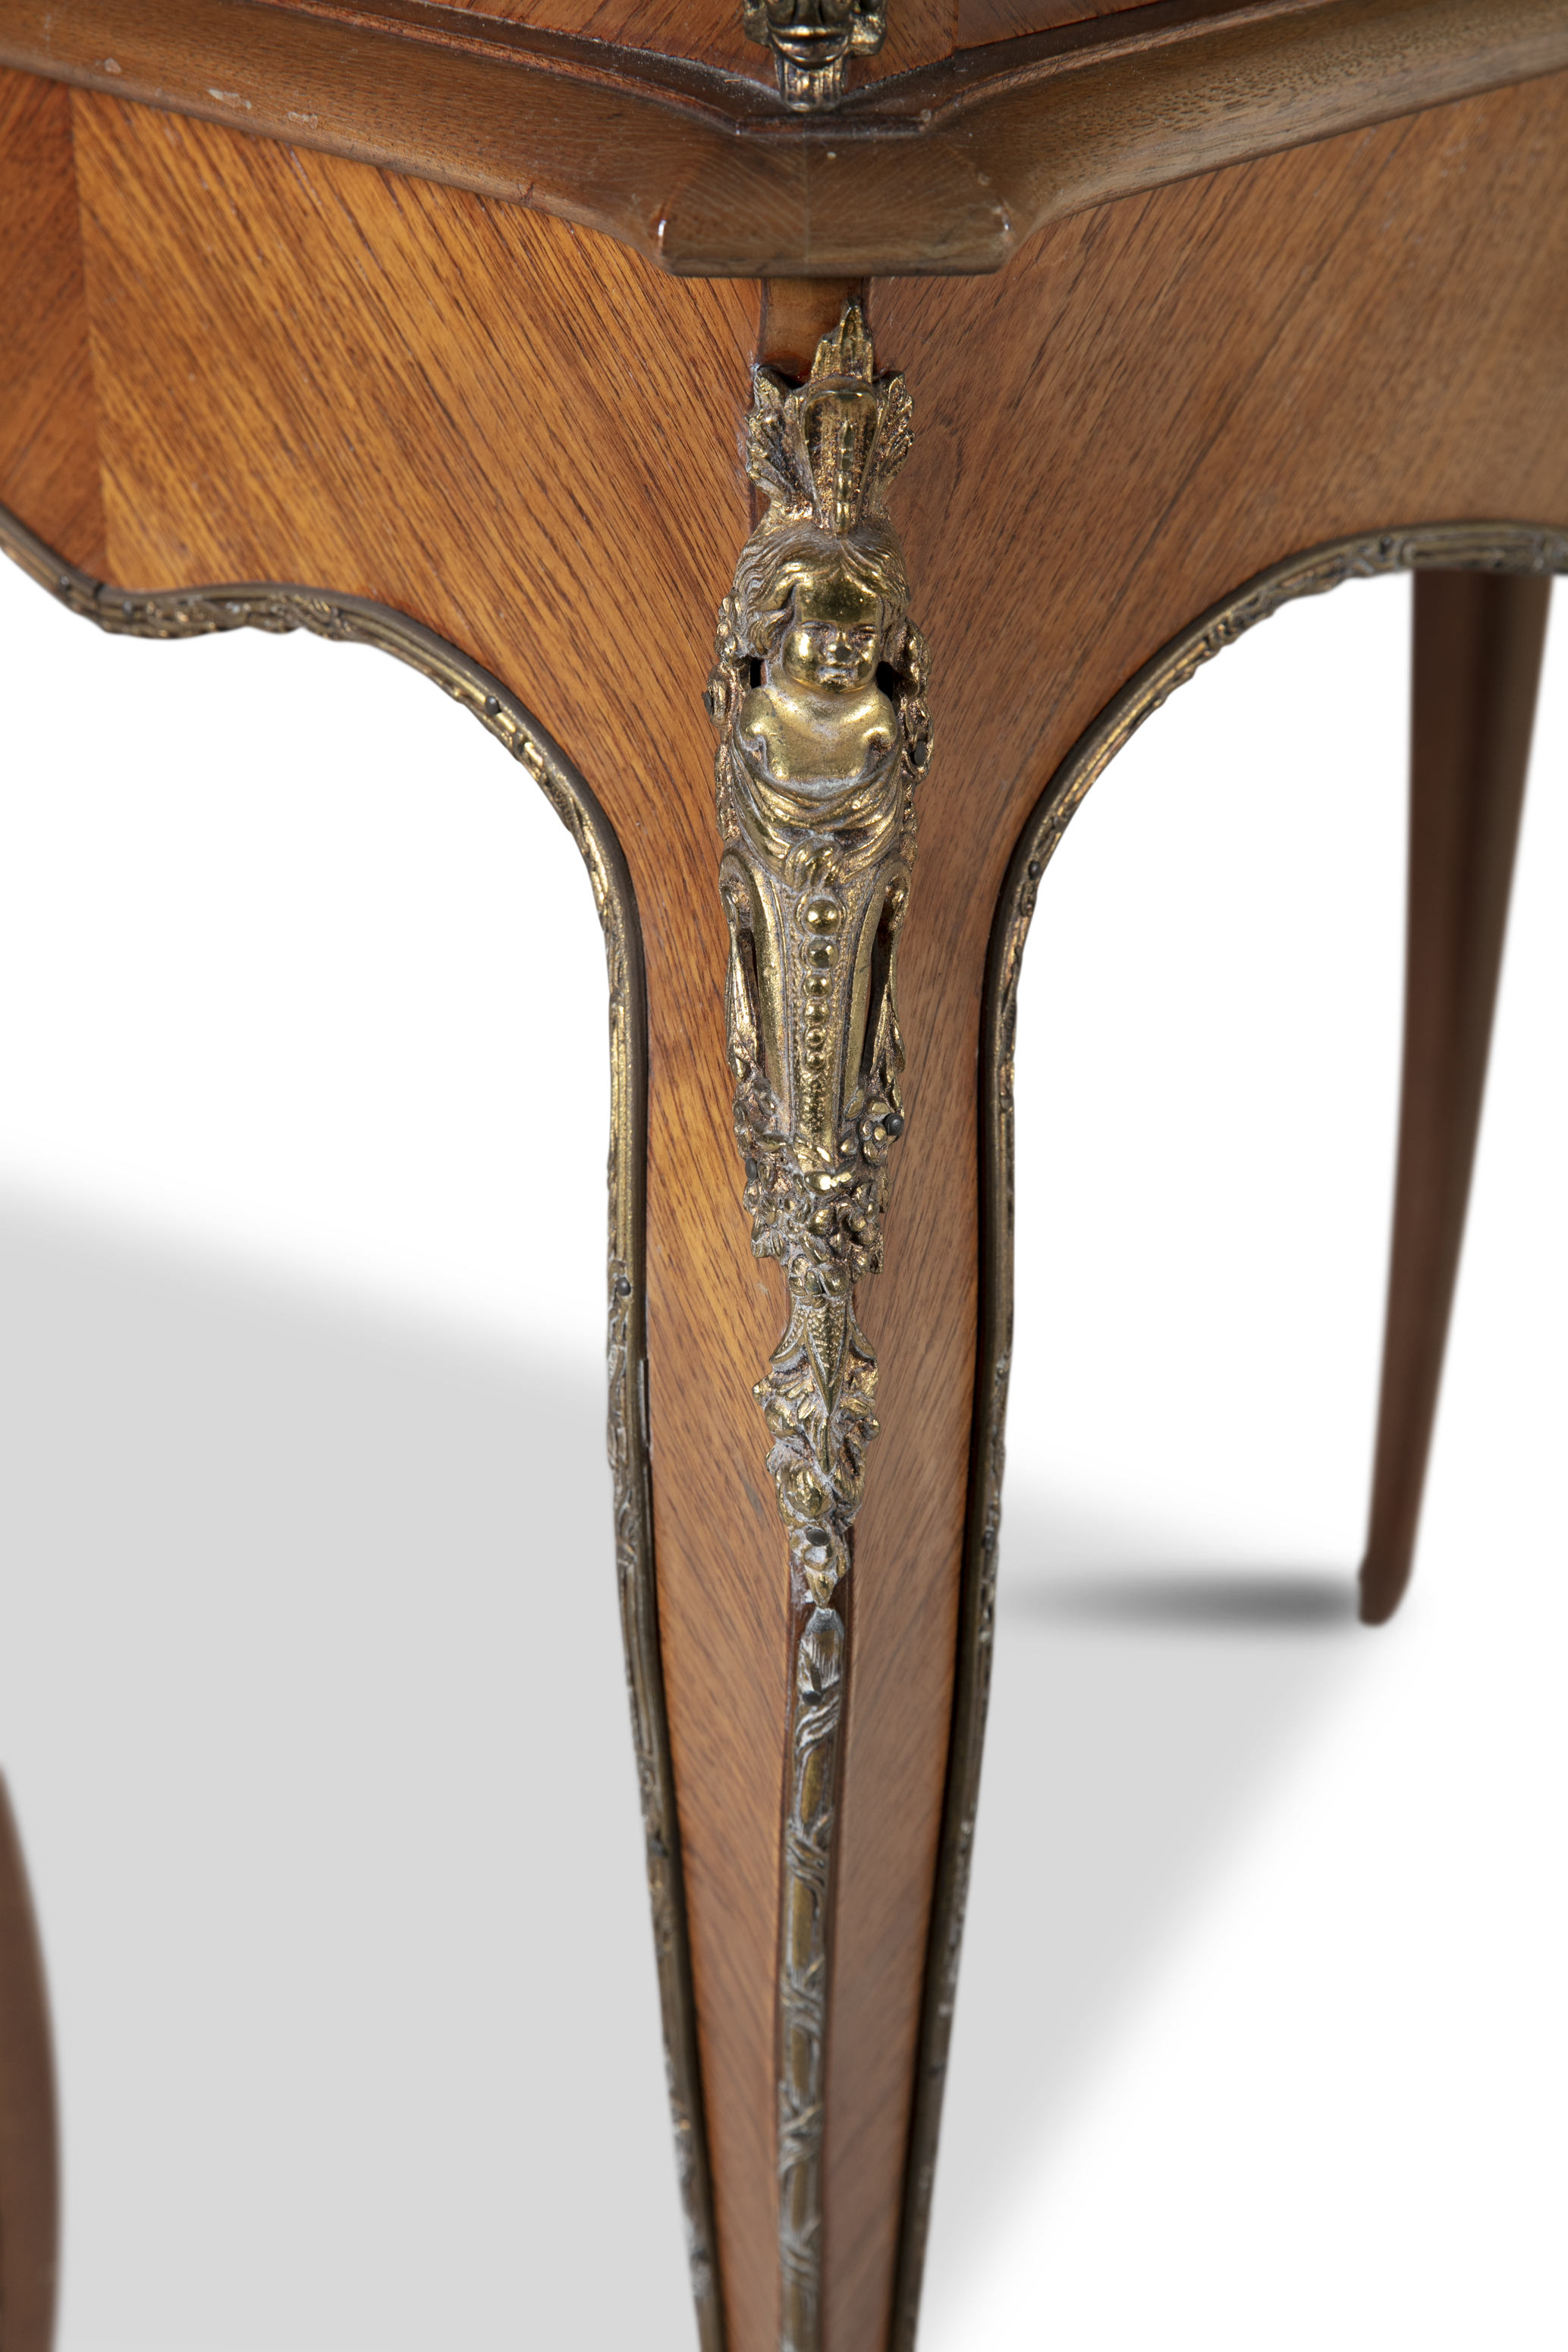 A LOUIS QUINZE STYLE KINGWOOD VITREEN, with arched top and swan neck pediment above a single - Image 3 of 3